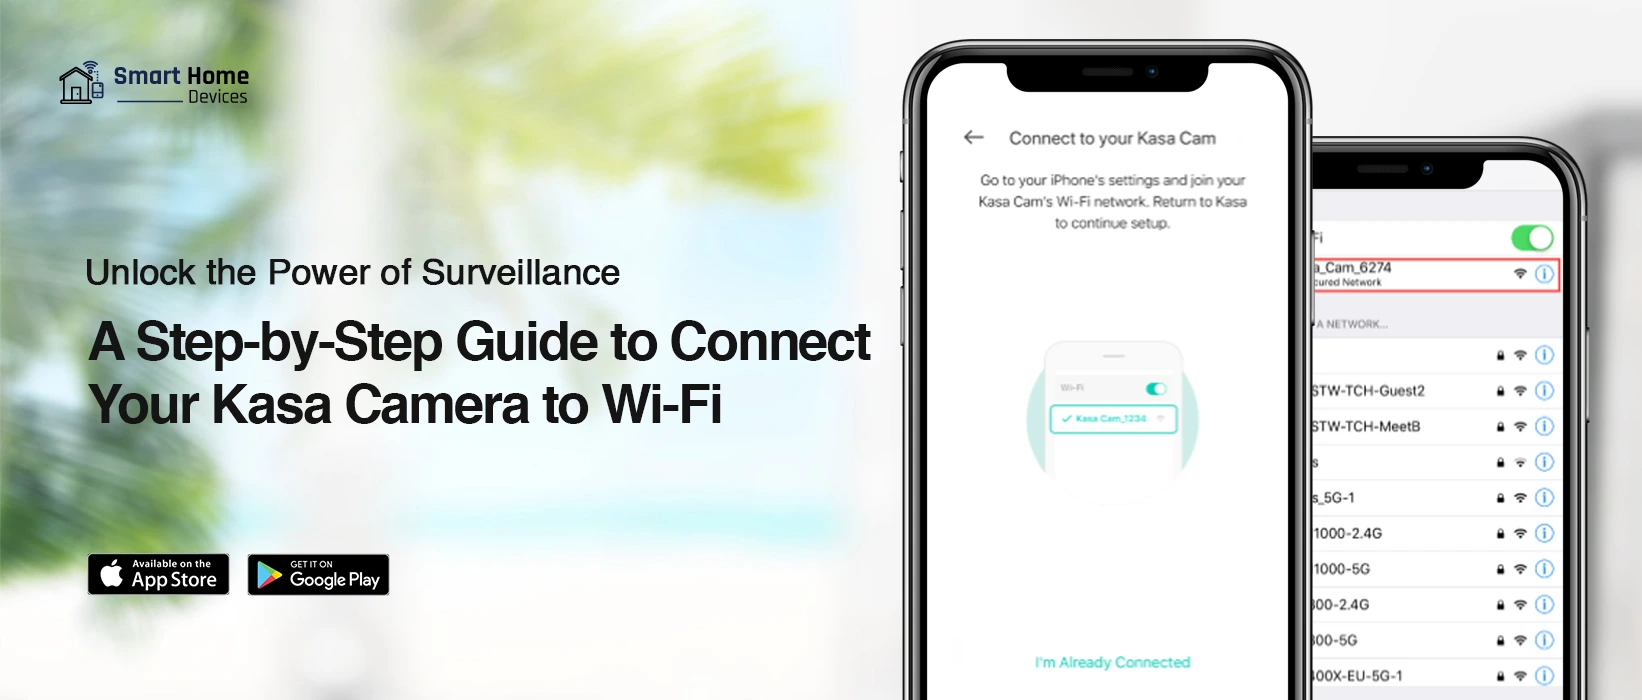 How to Connect Kasa Camera to Wi-Fi